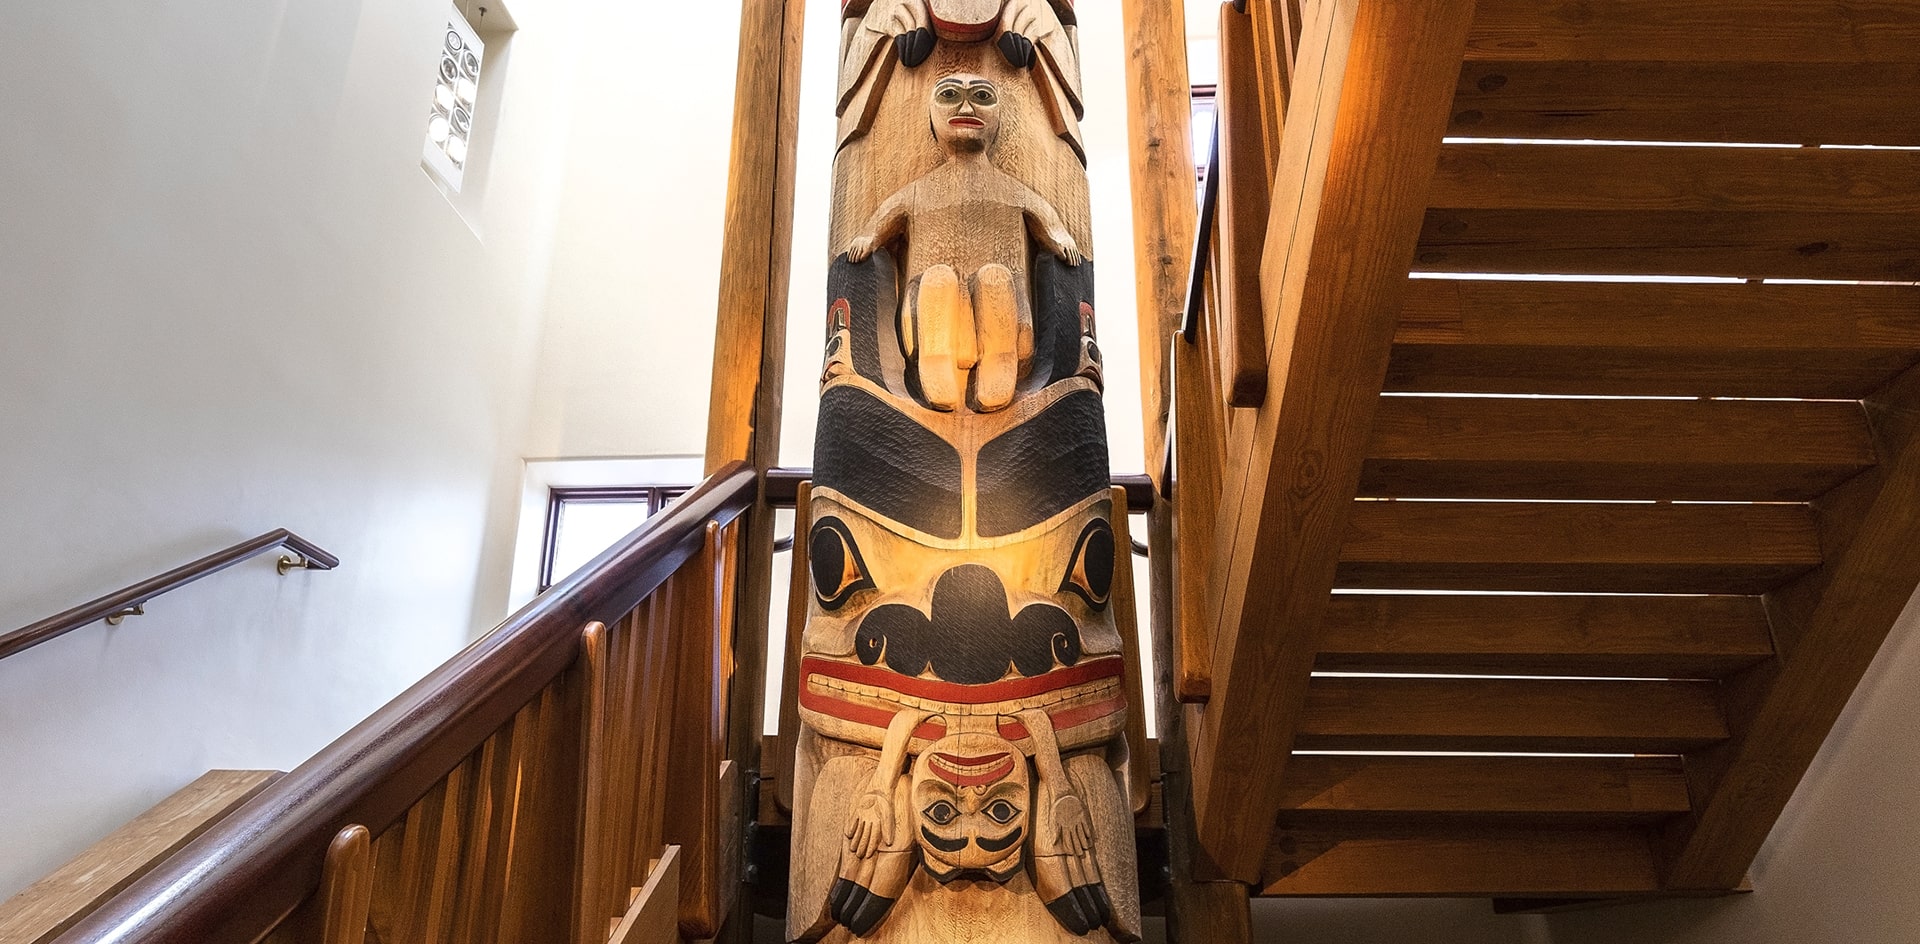 Lee Wallace (Haida, born 1952) Golden Hill Totem Pole, 1994-1996 Western red cedar, paint. Commissioned by the Indianapolis Totem Pole Project. Dr. Richard Feldman, founder.